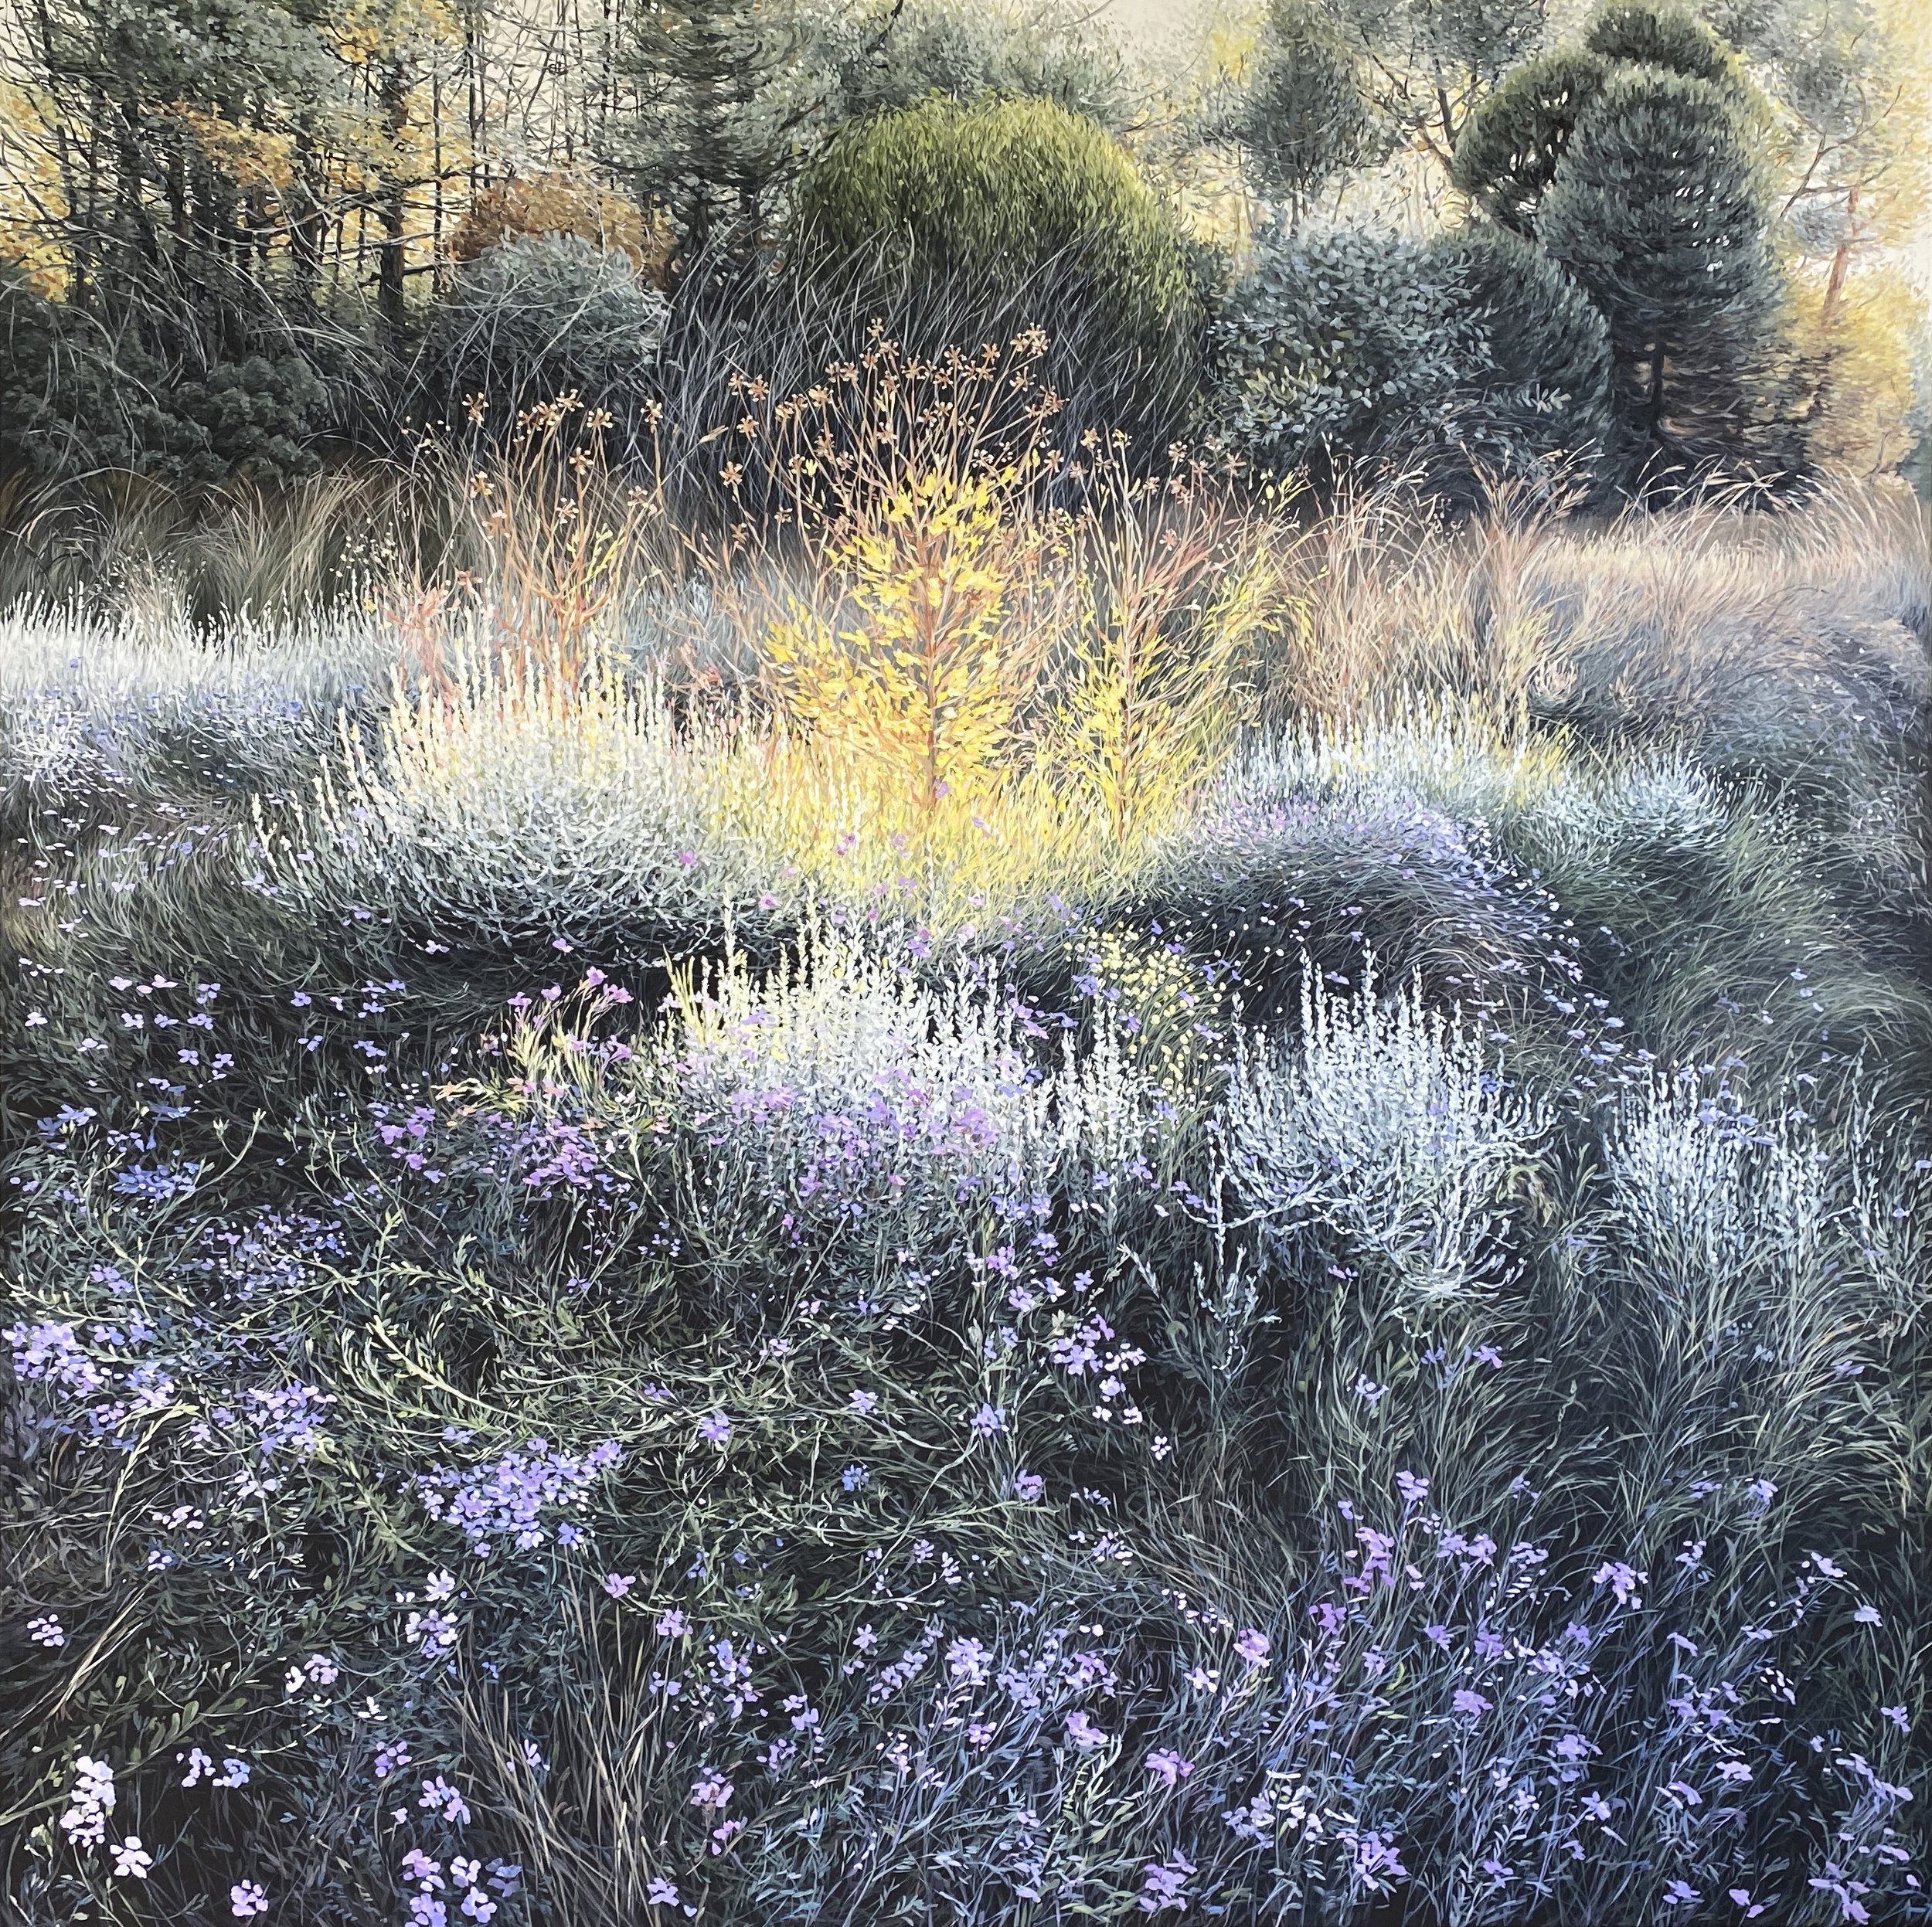   Afternoon in Mission Forest  Finalist Ravenswood Art Prize  Oil on Canvas 137 x 137cm  Sold 